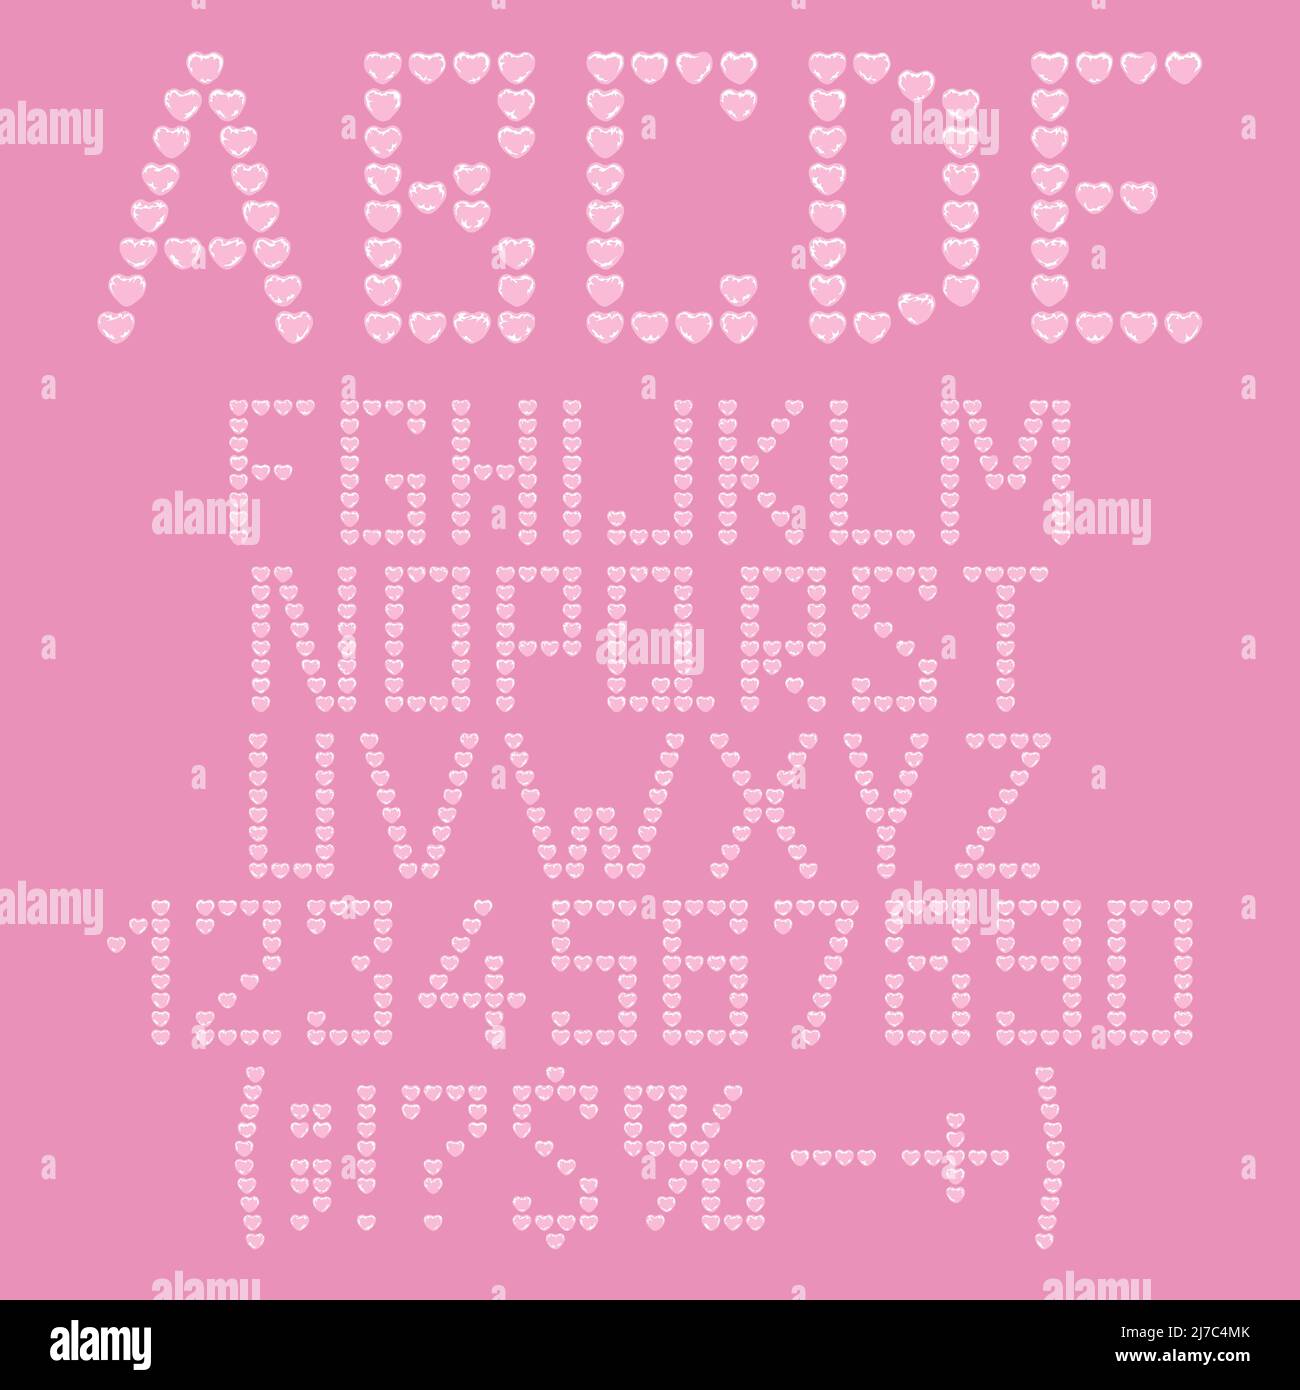 Alphabet, letters, numbers and signs from plastic heart bubbles, packaging bubble wrap. Set of isolated vector objects. Stock Vector